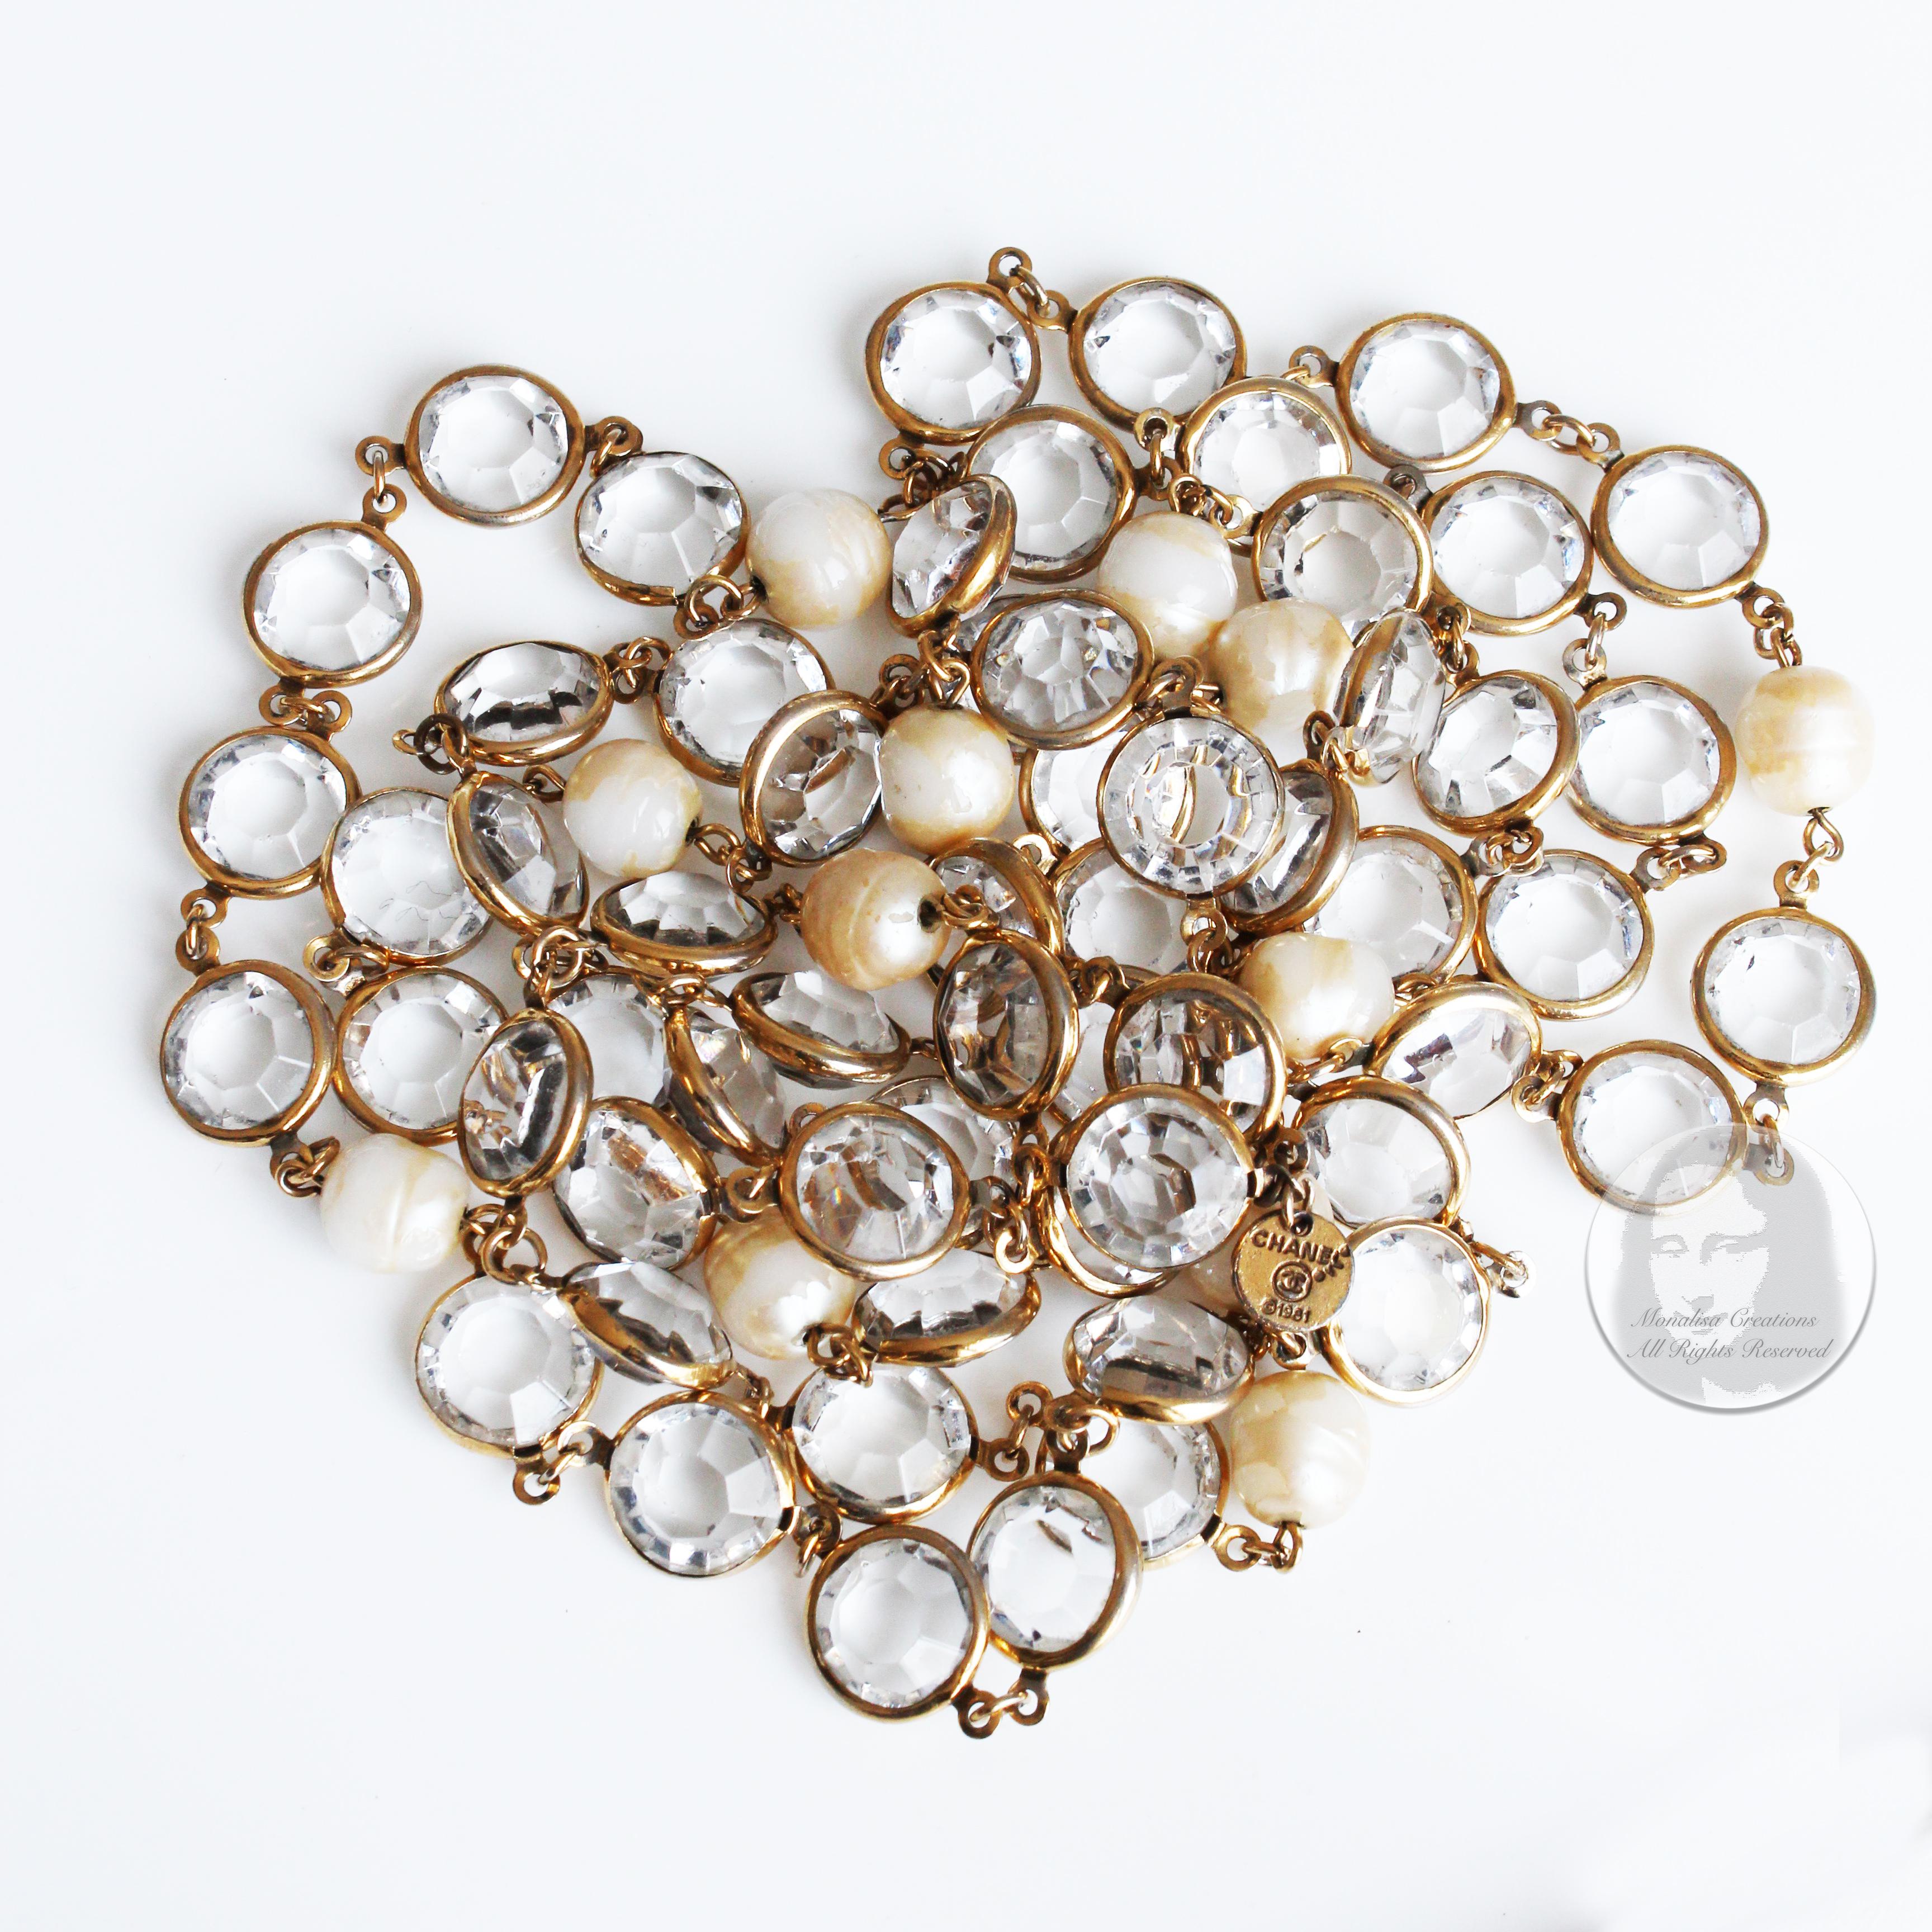 Authentic, preowned, vintage Chanel sautoir style necklace, released in 1981. Made from gold metal, it features round faceted crystals and baroque-style faux pearls. No closure, it is designed to slip over ones head, and can be doubled or knotted